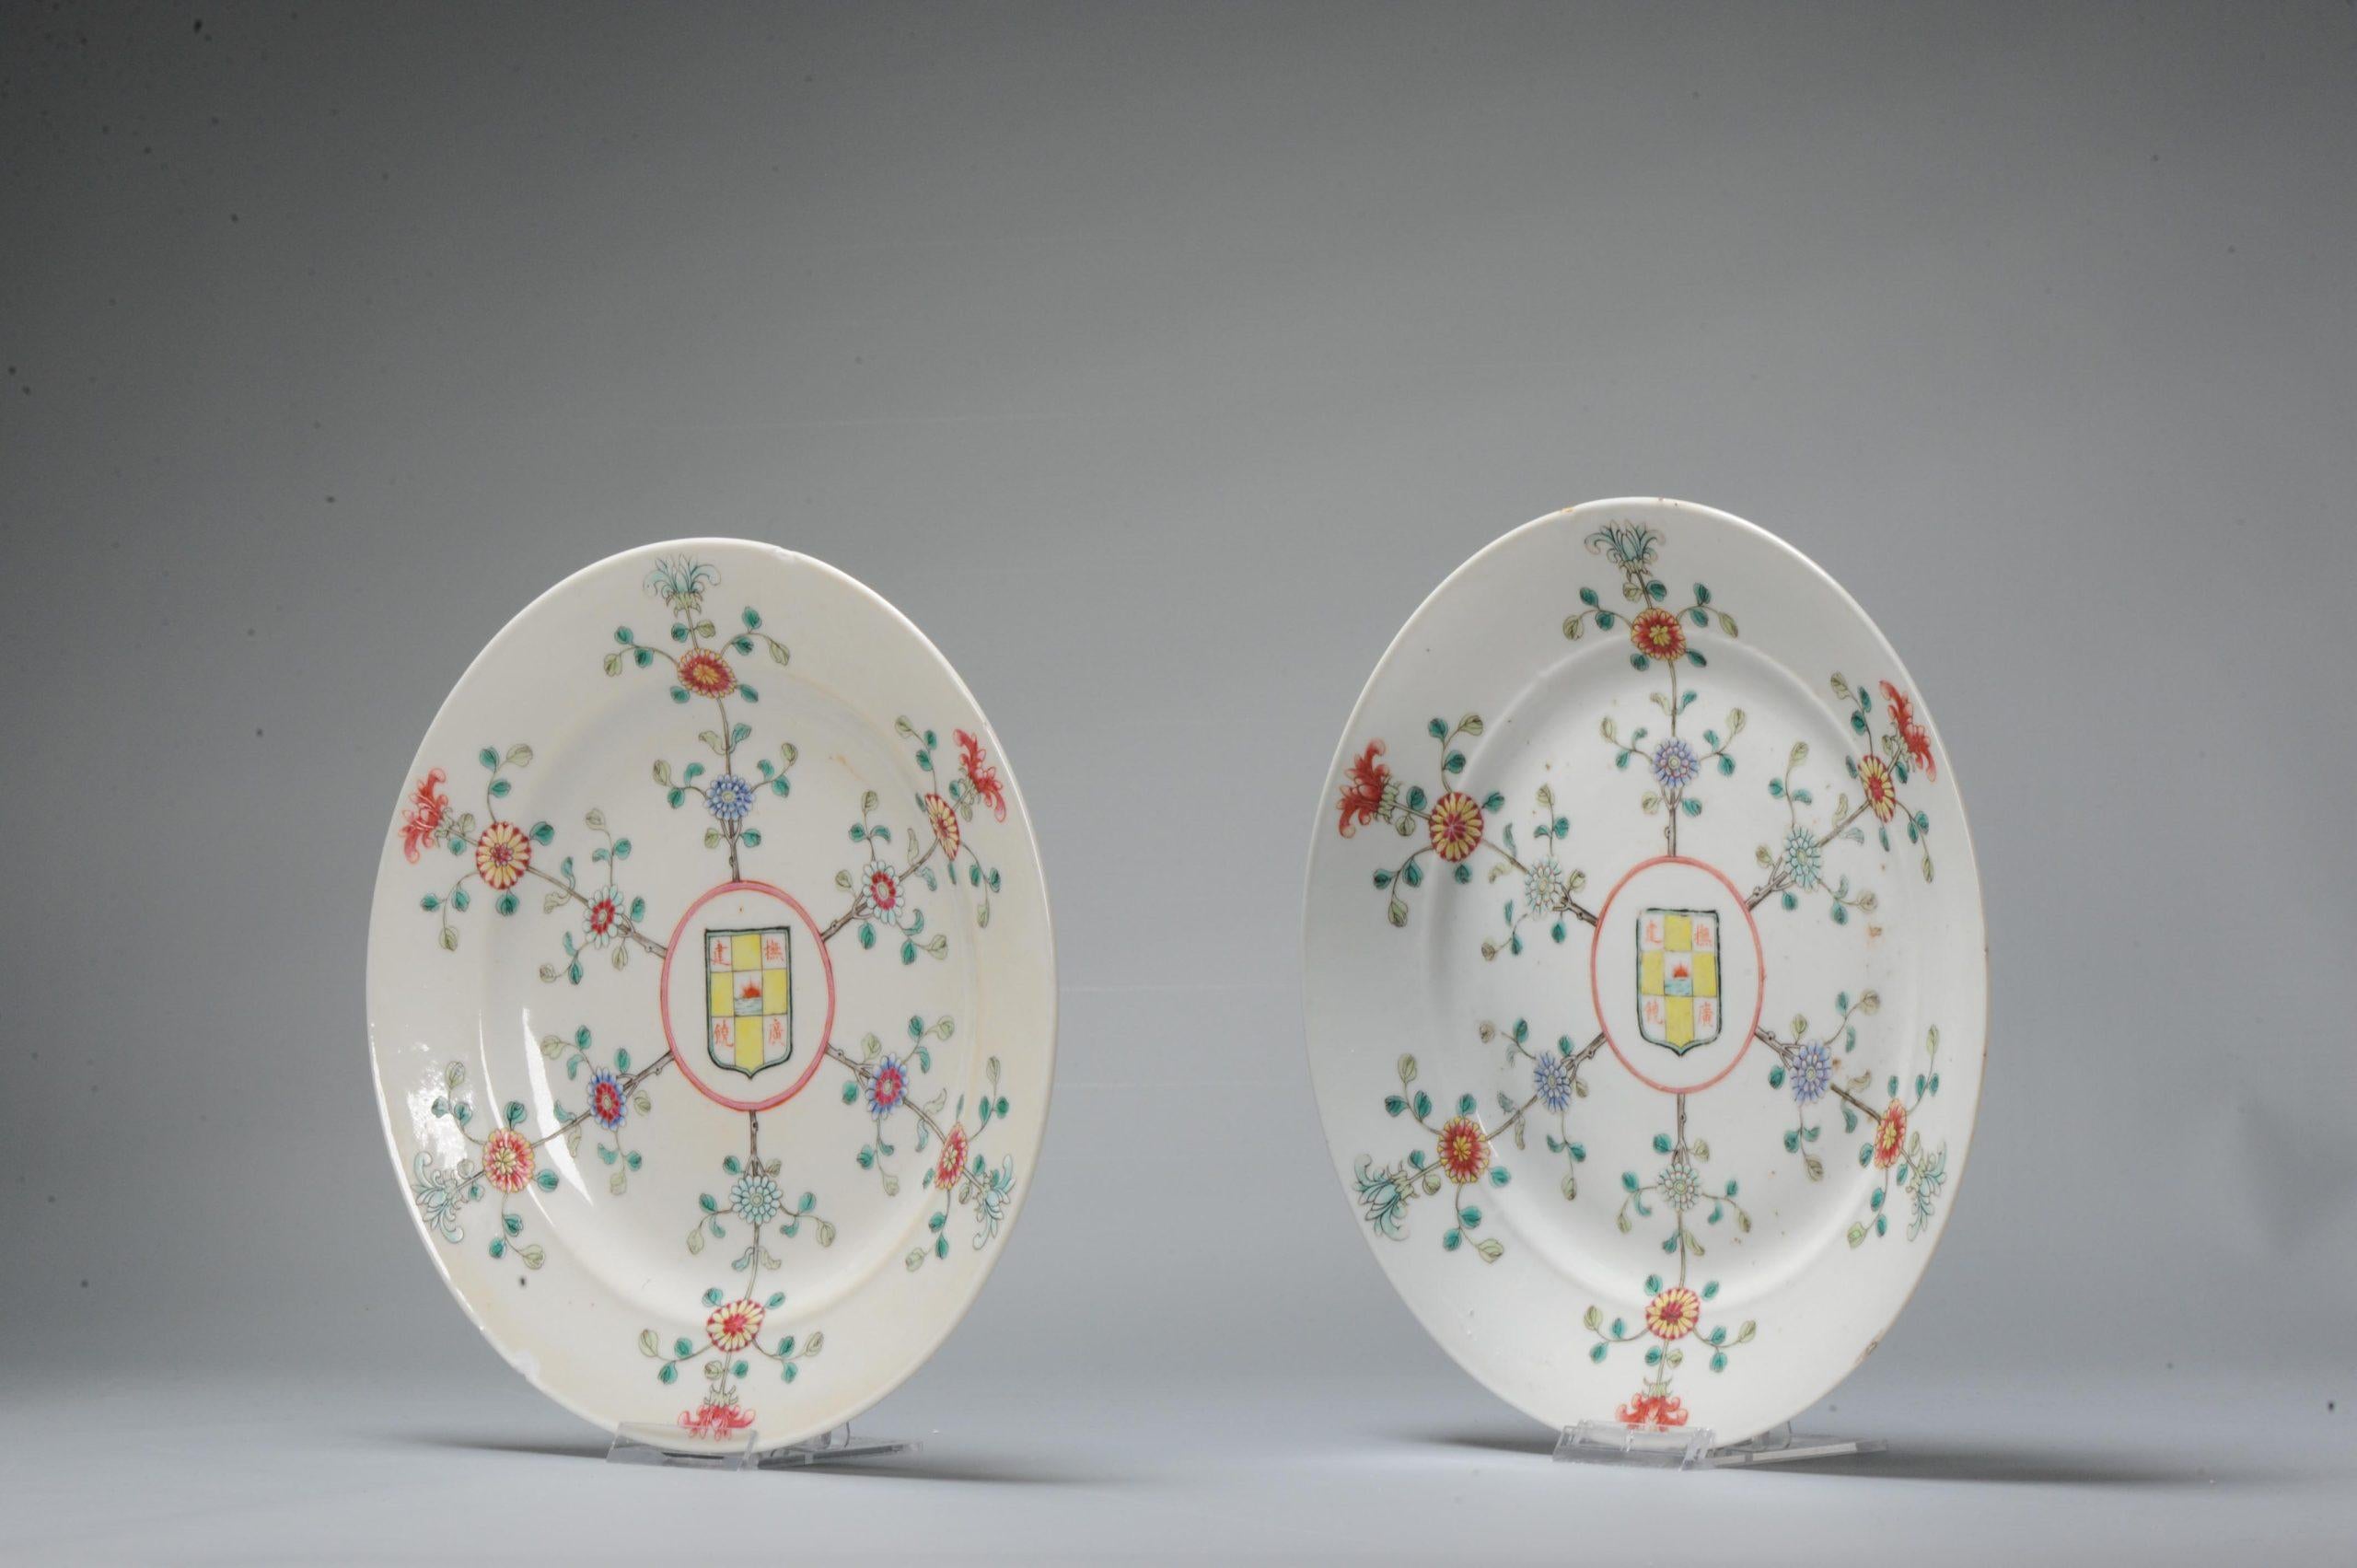 Lovely Guangxu/Xuantong period dishes, two concentric circles and an endless knot at the base. Very high quality with flowers and central a shield with characters and central a rising sun.

According to the study of our friend, the dishes were a